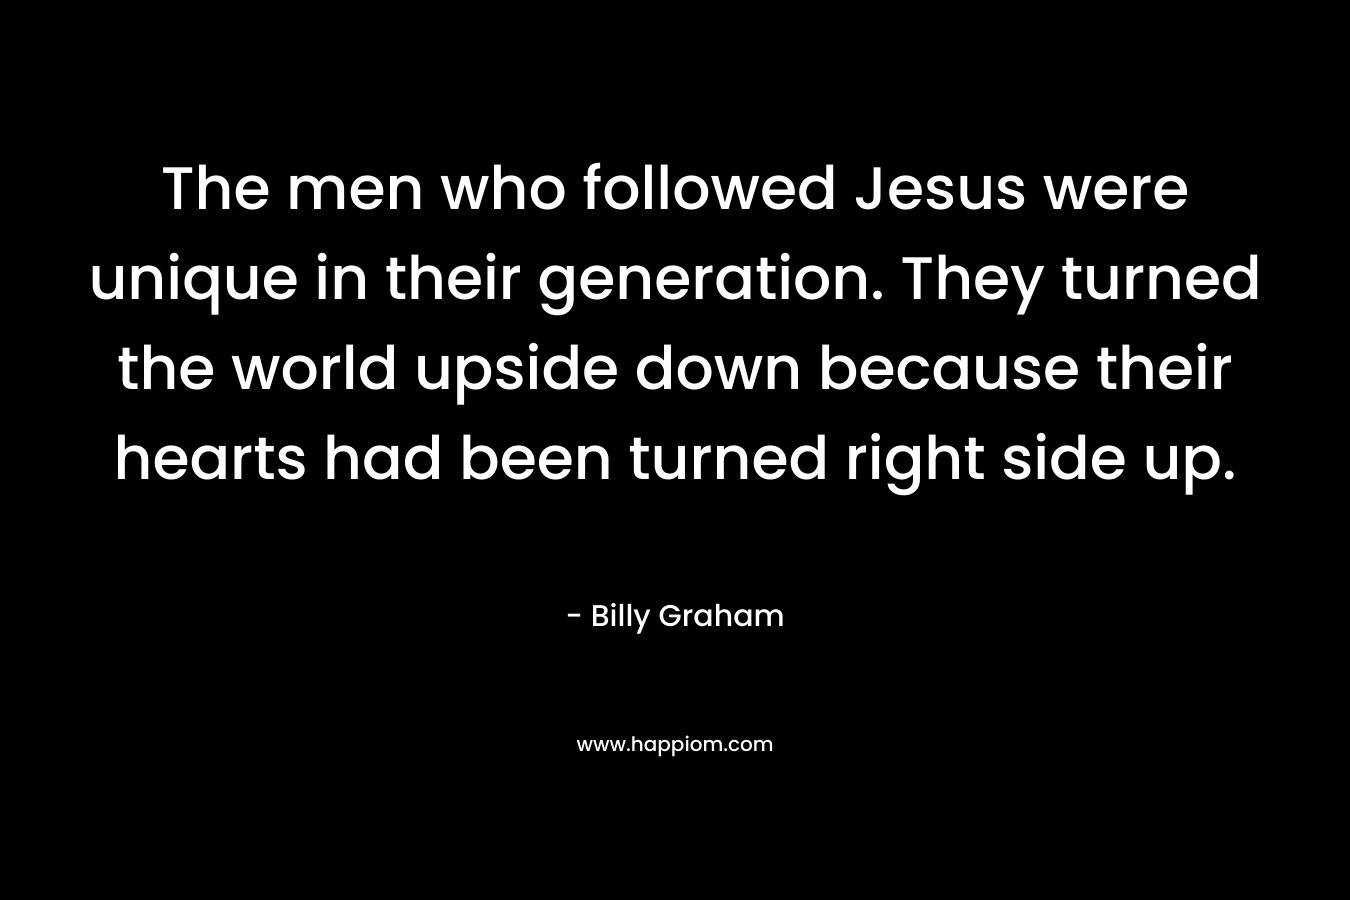 The men who followed Jesus were unique in their generation. They turned the world upside down because their hearts had been turned right side up.